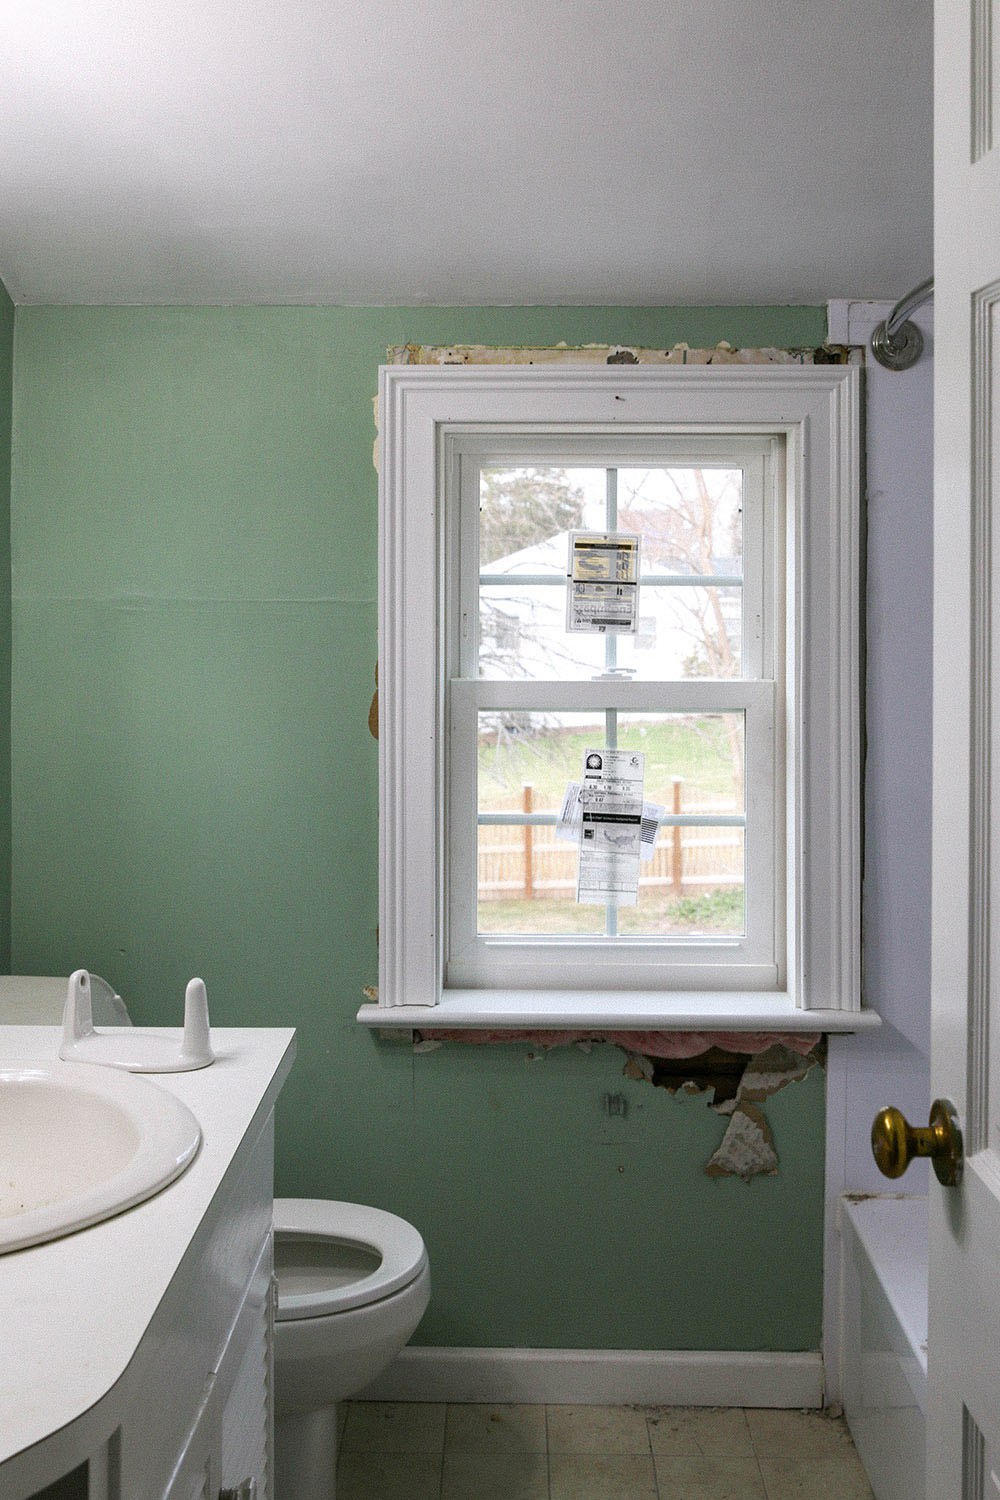 A bathroom with green walls and a new window.